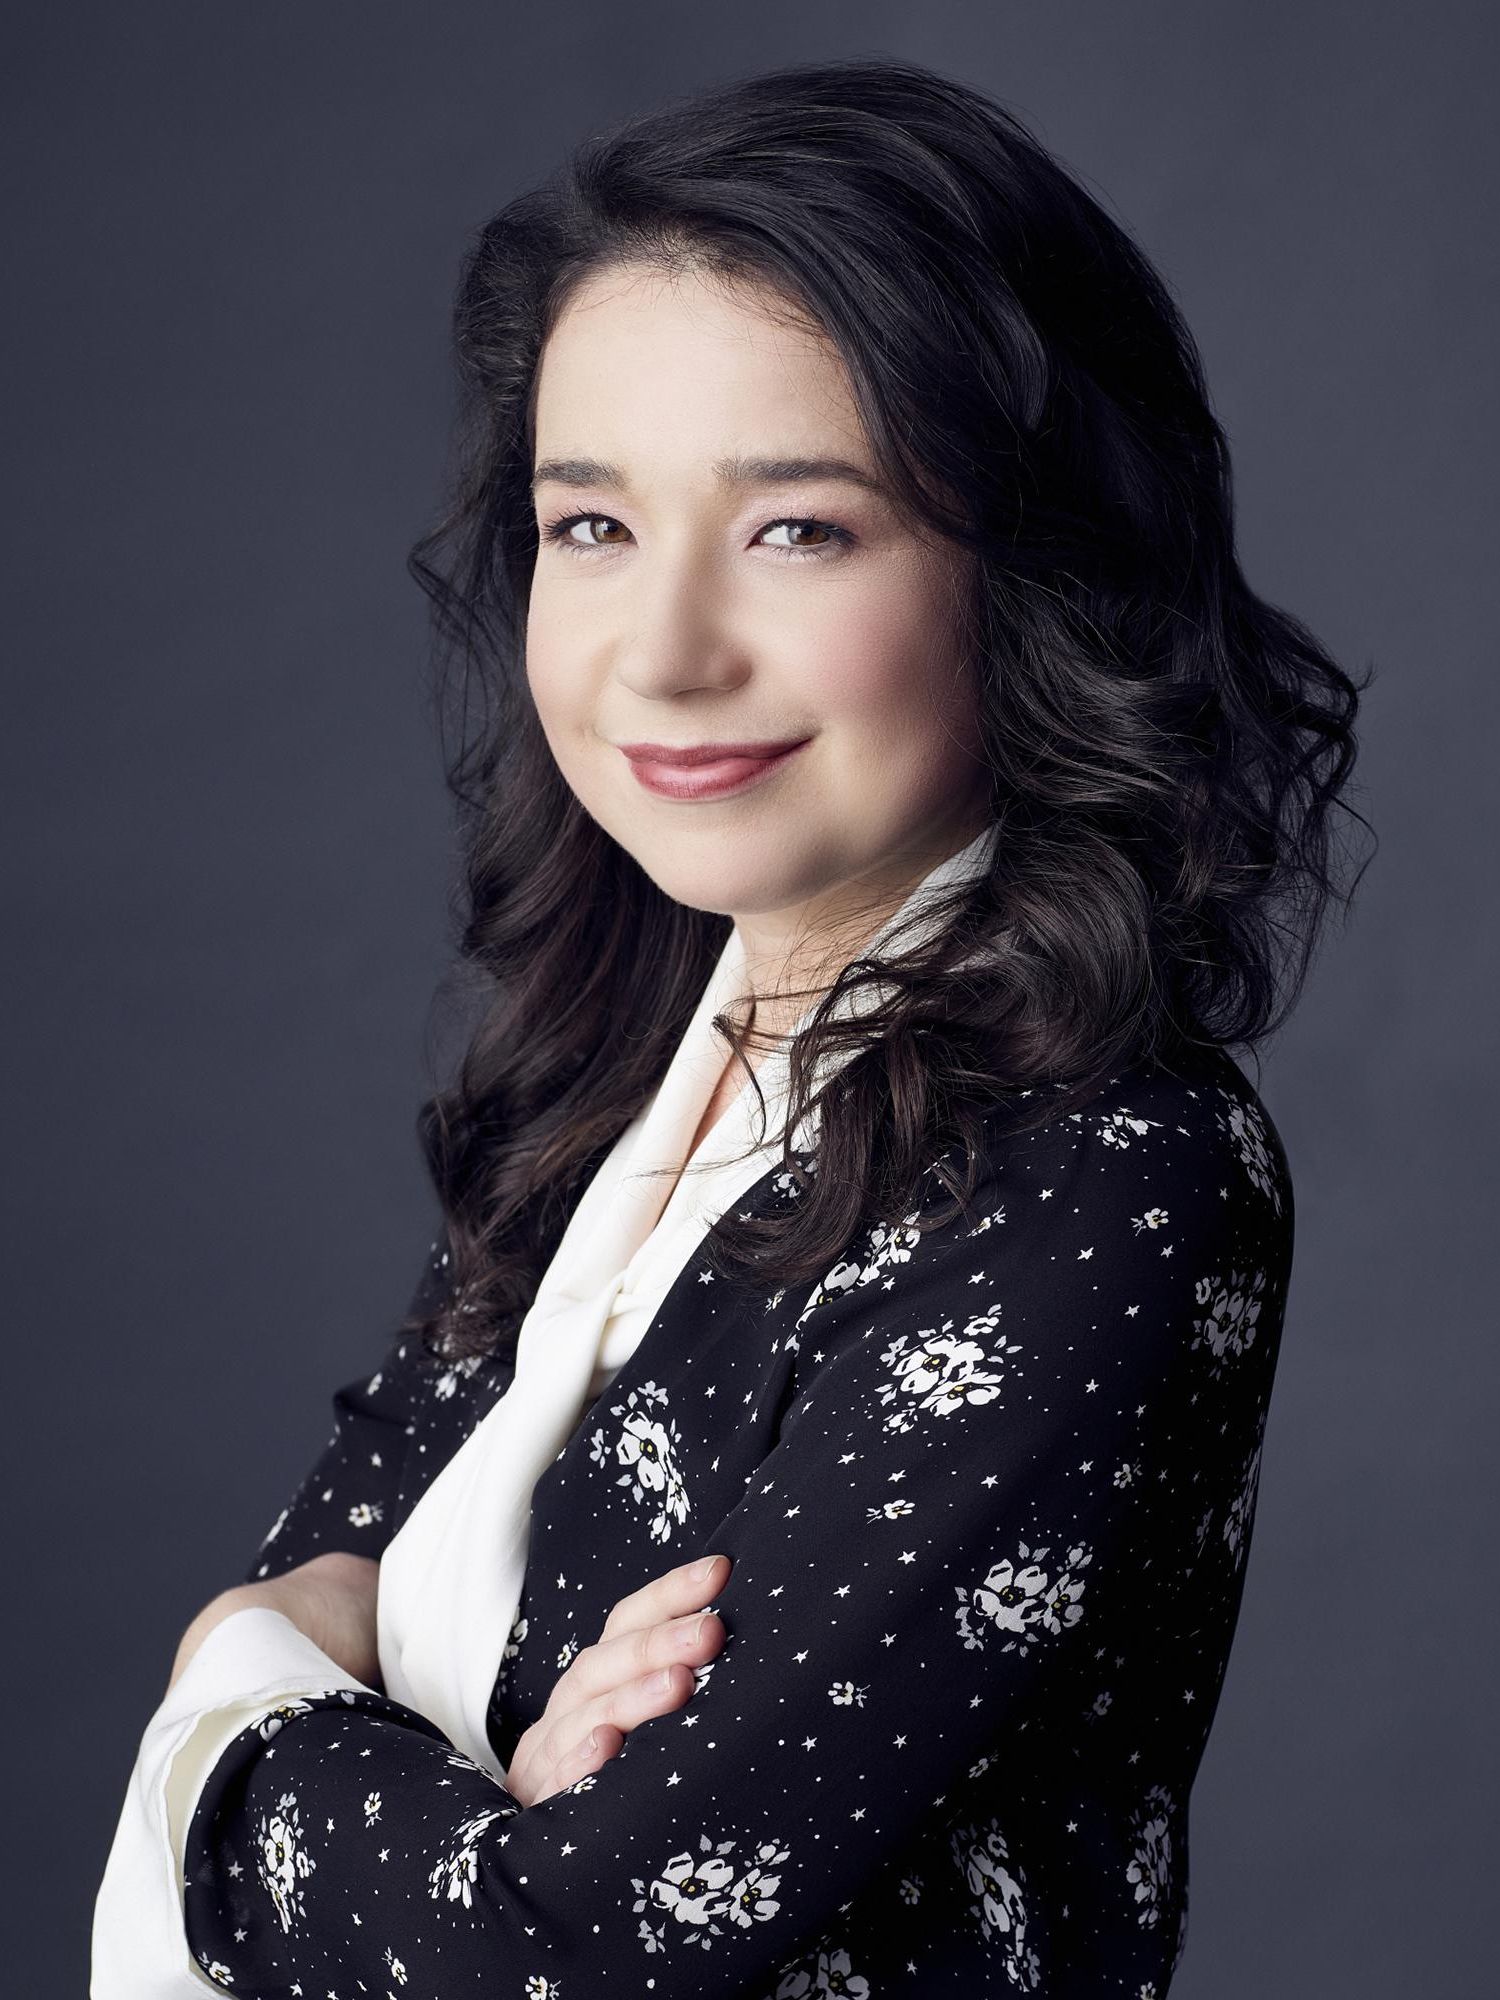 Sarah Steele of The Good Fight poses against a gray backdrop wearing a white blouse and flower patterned navy blazer.